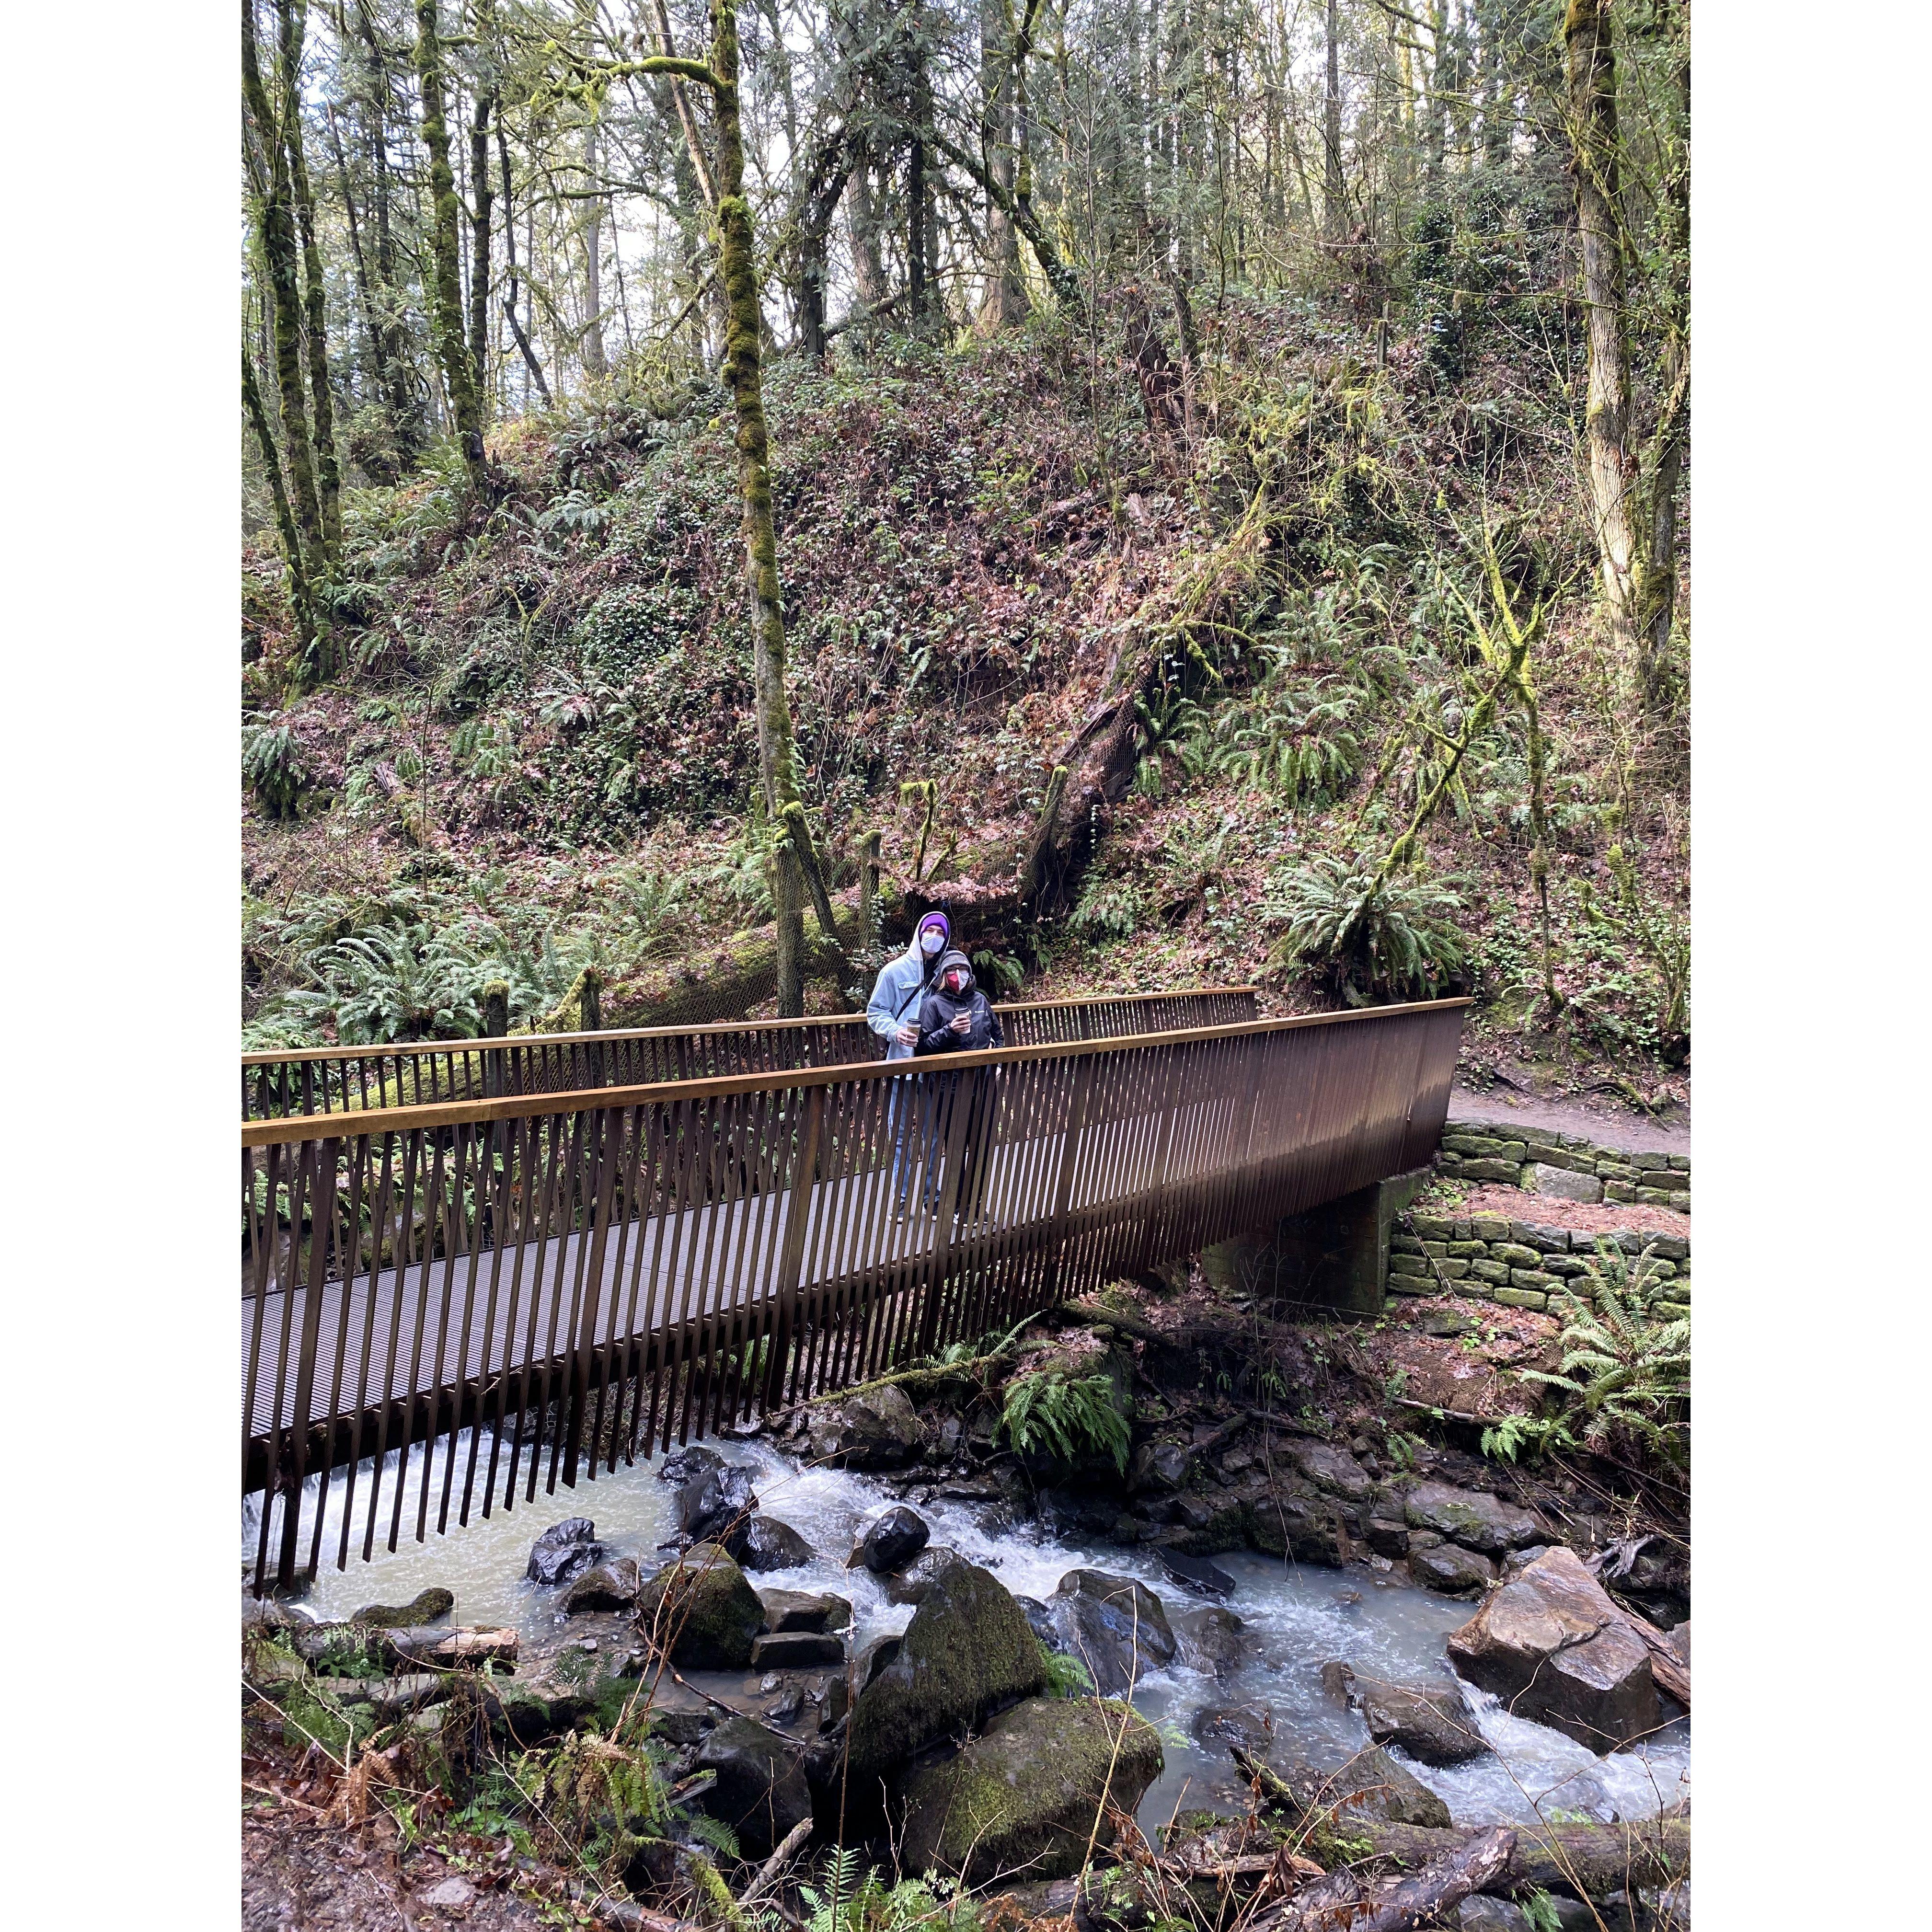 Hiking in Macleay Park In NW Portland 